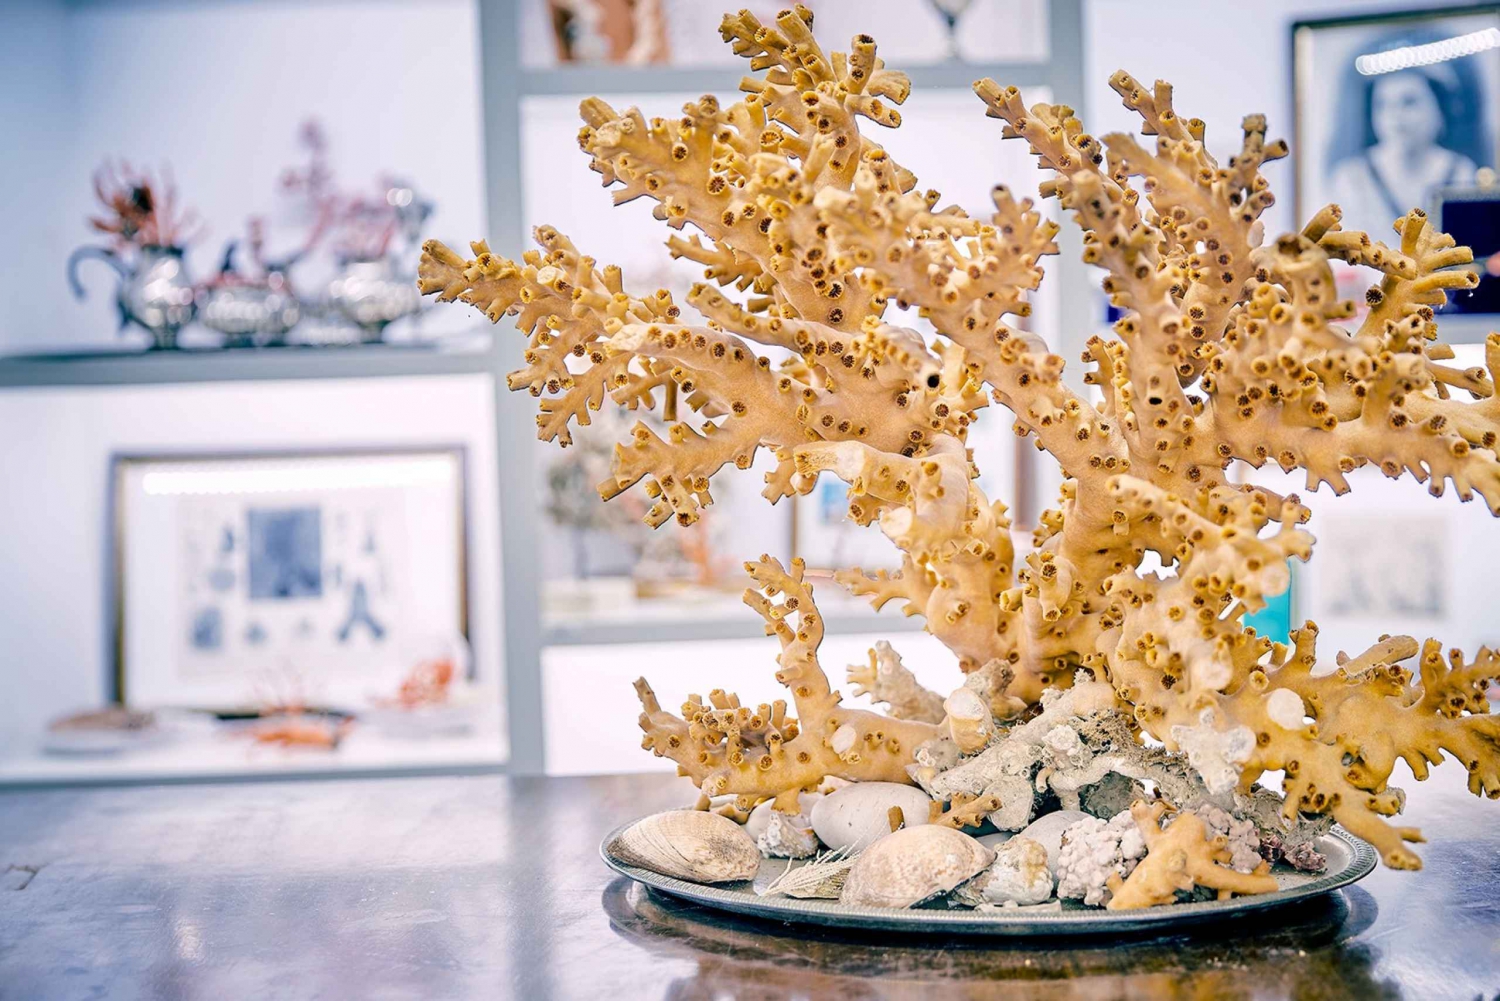 Guided tour of the coral museum in Sciacca